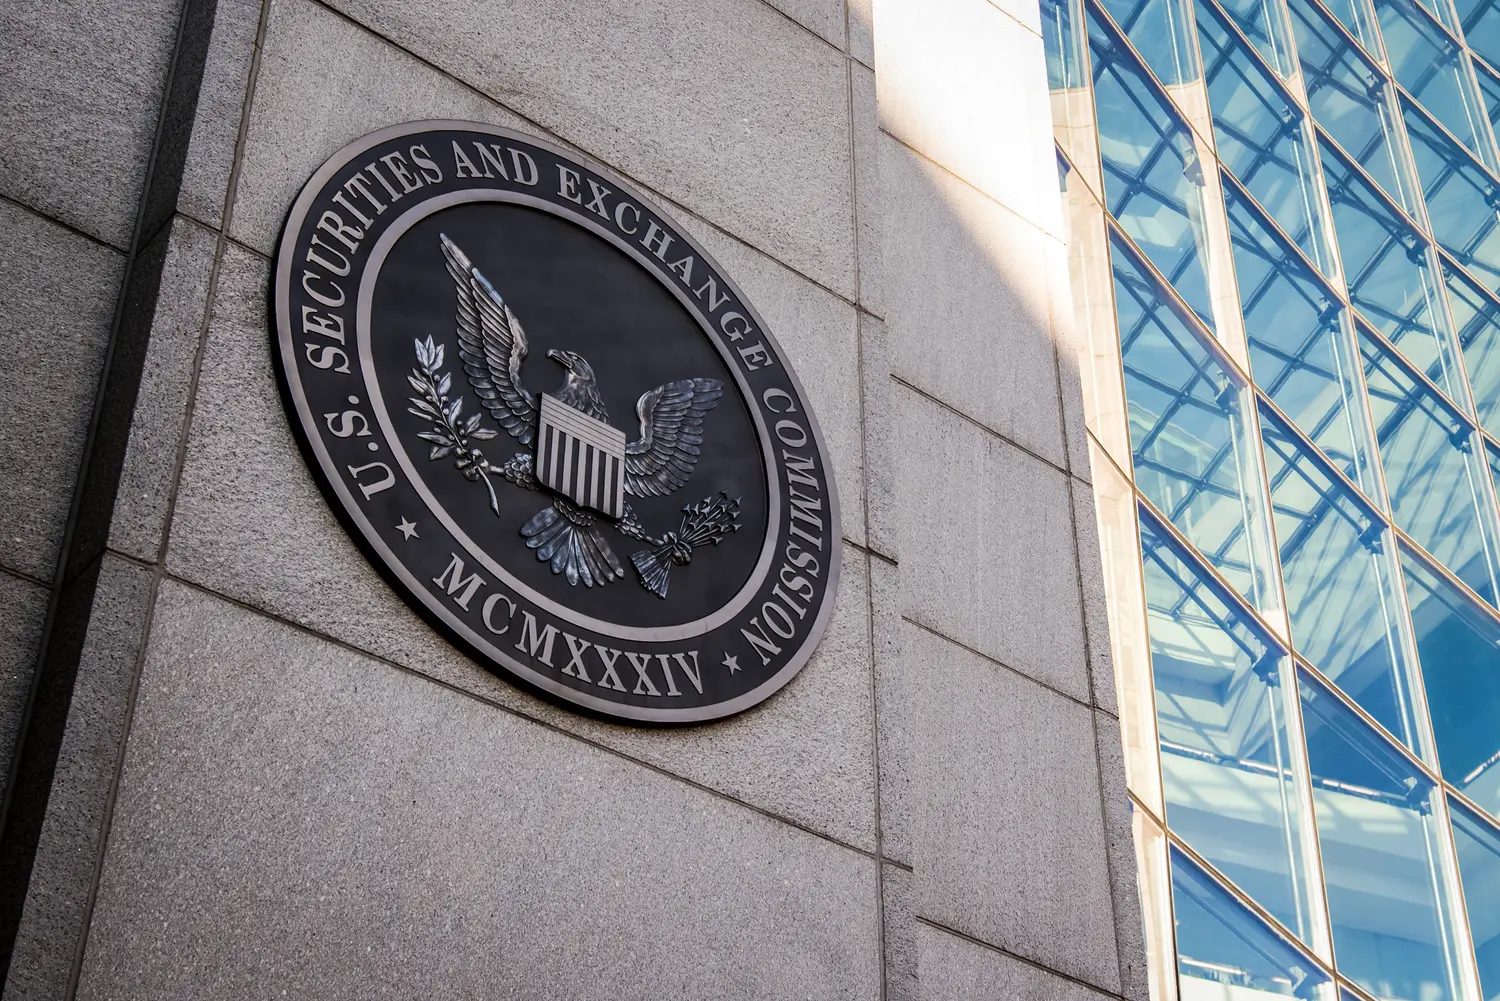 Post-election pressures intensify SEC's struggling climate agenda in New Year